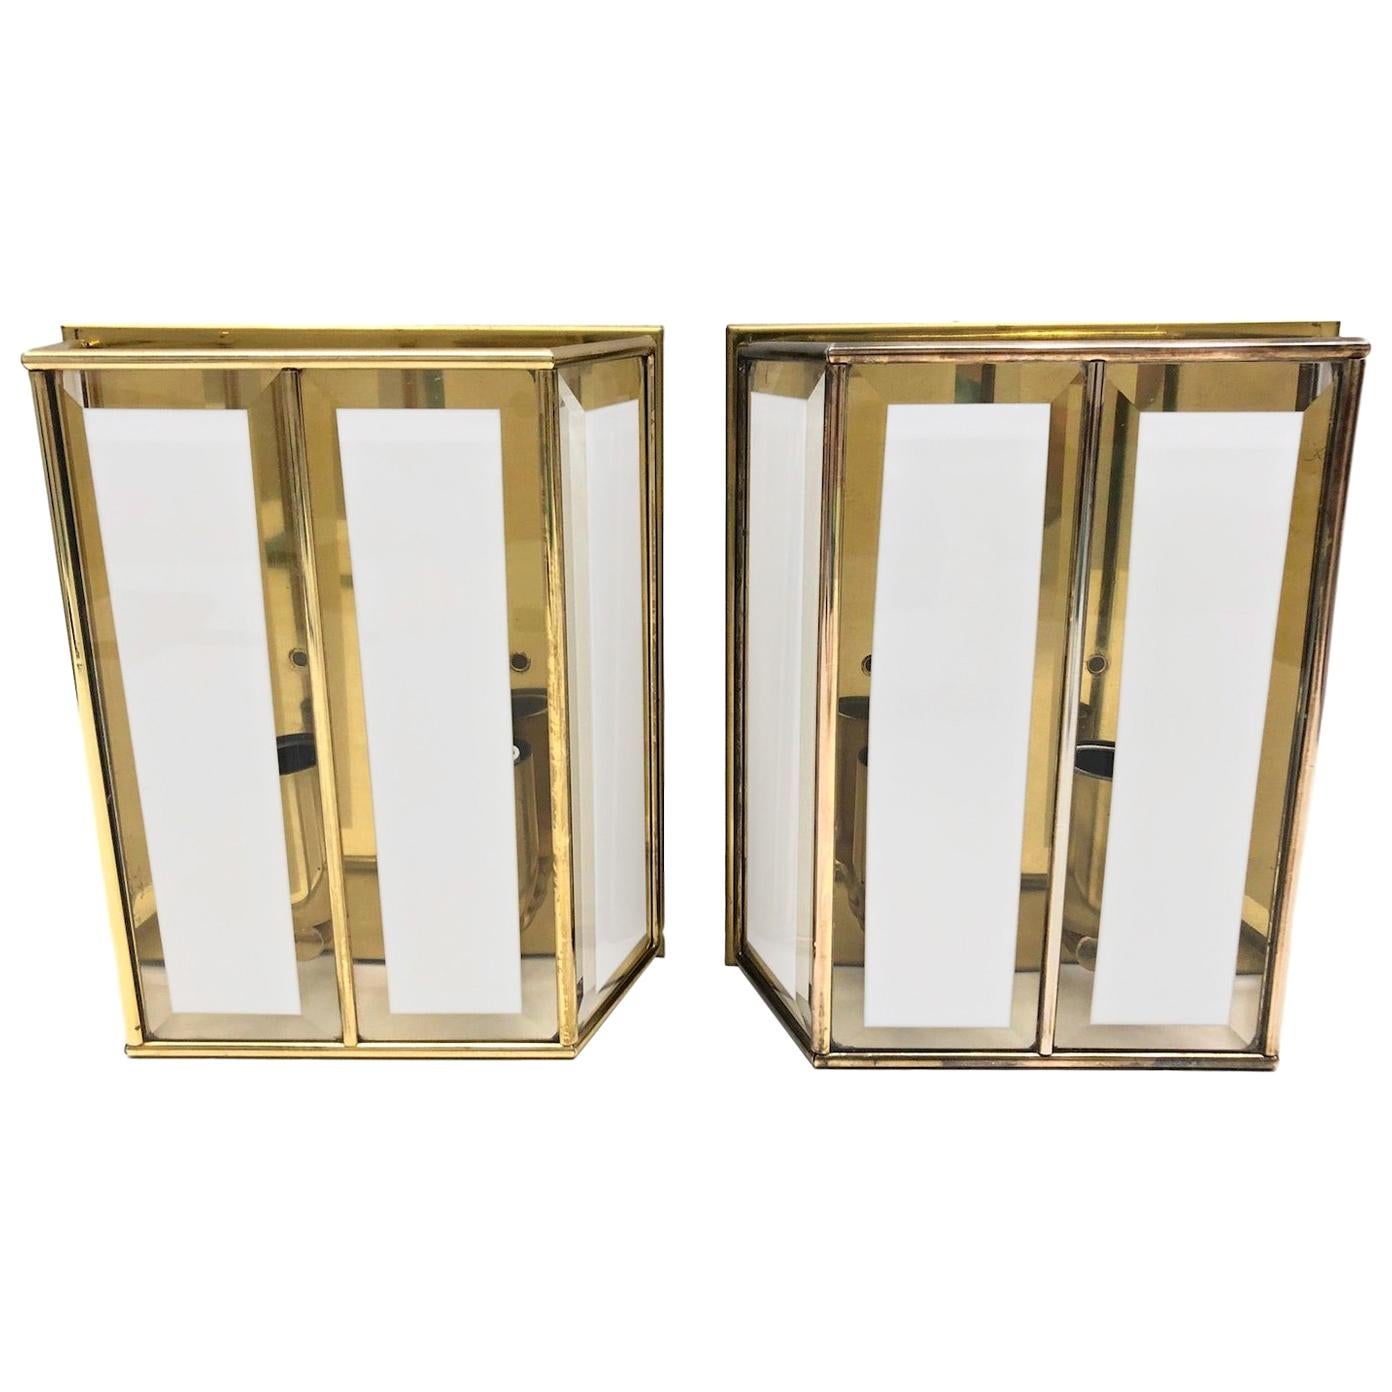 Pair of Modernist 1970s German Brass and Glass Wall Lights